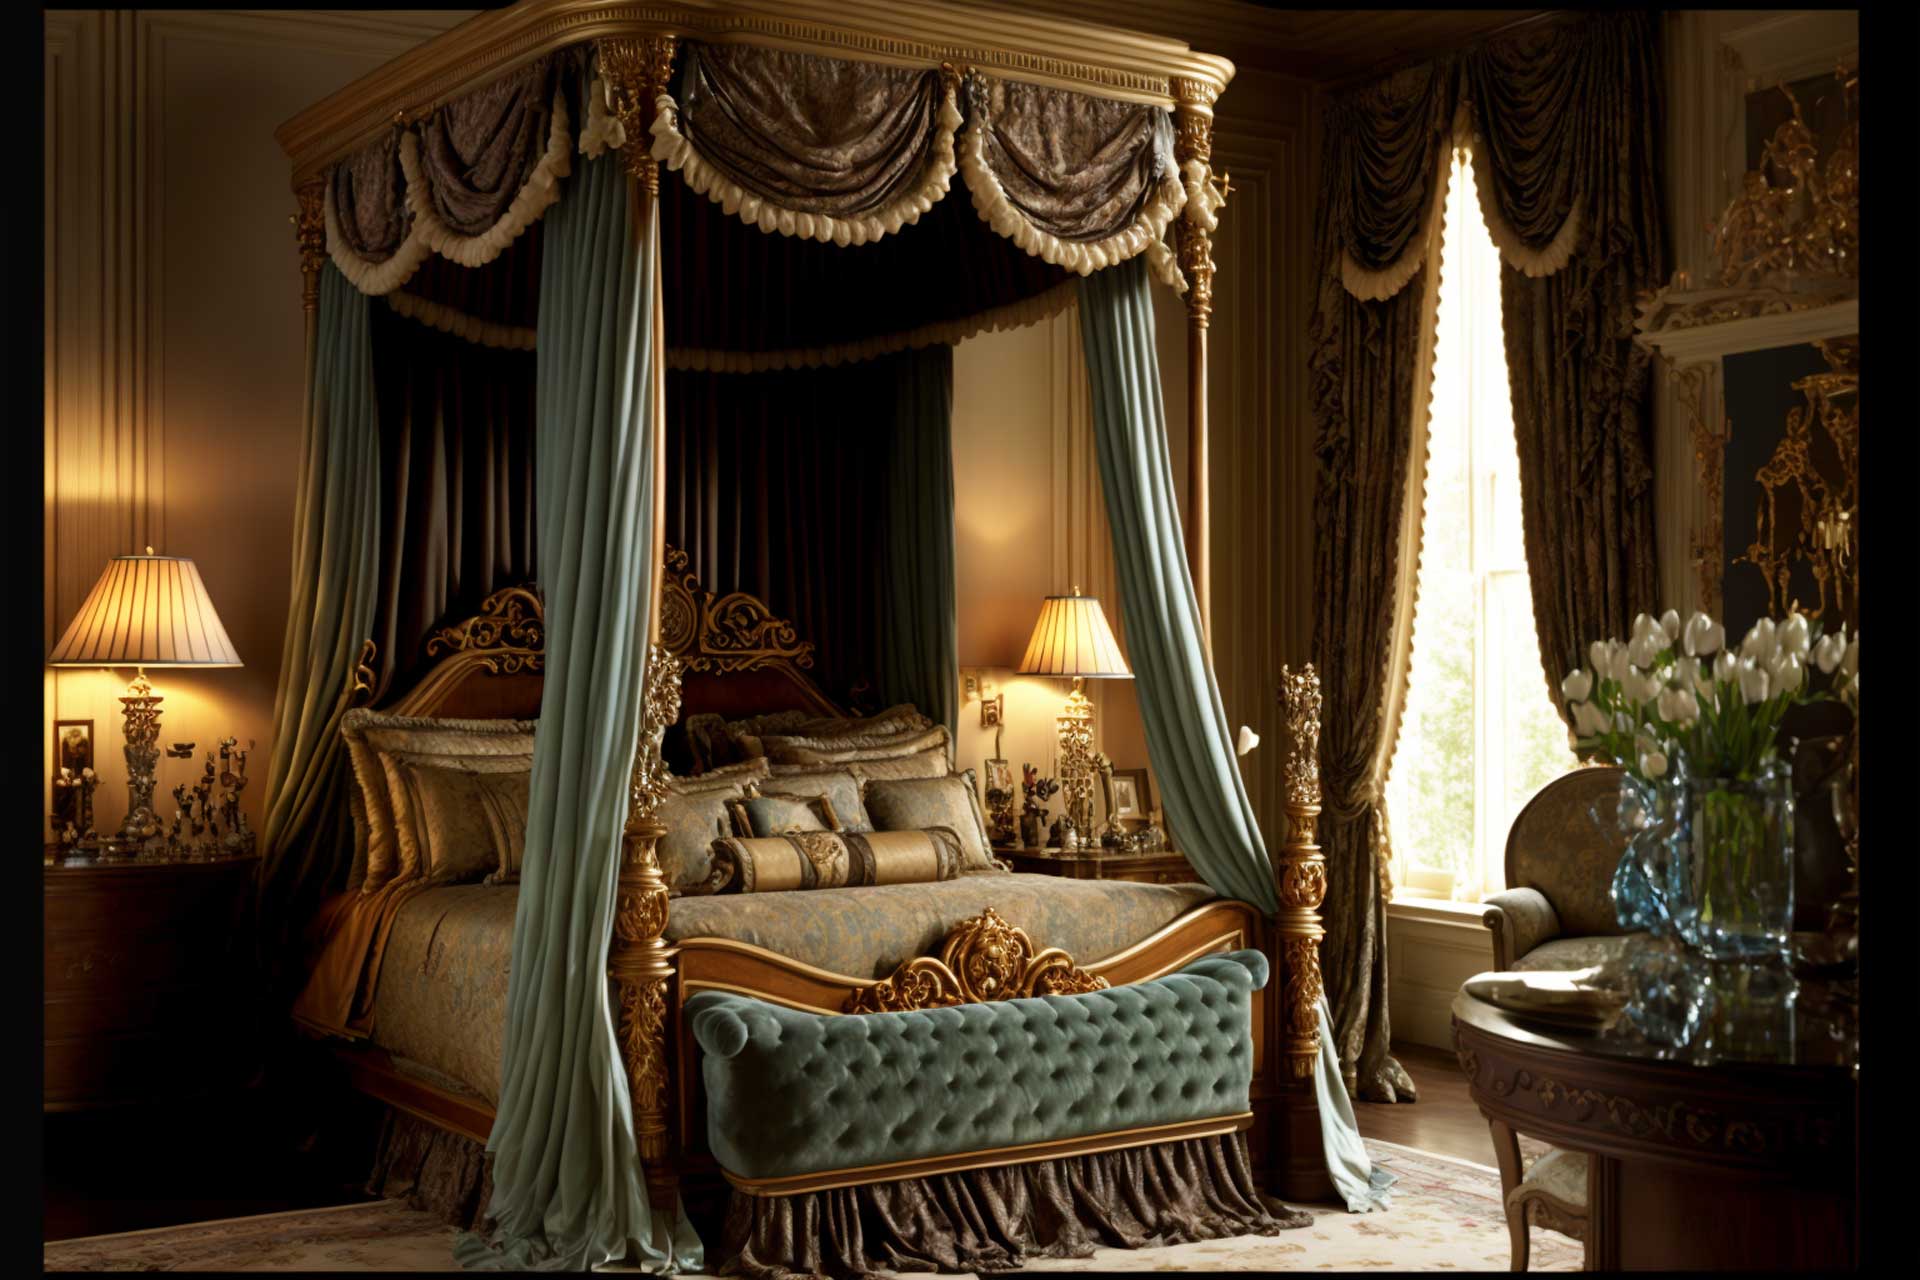 Grand Canopy Bed With Luxurious Bedding And Matching Furnishings